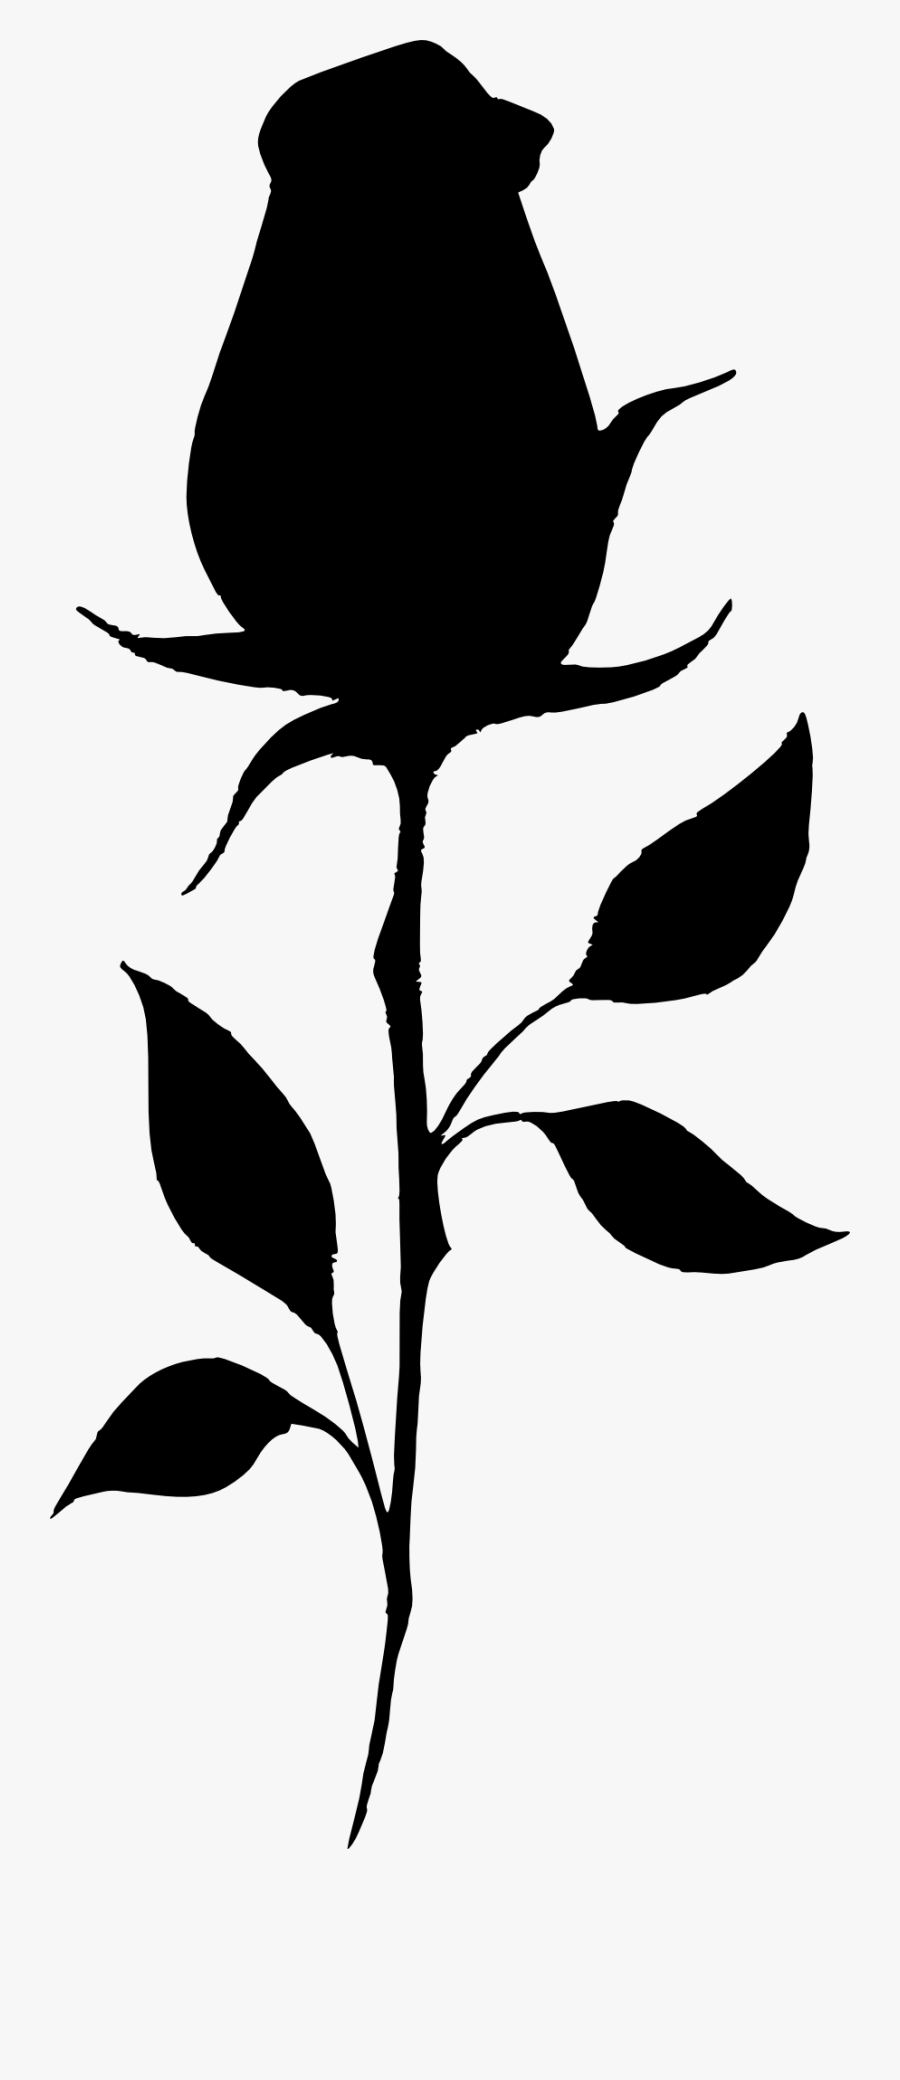 Silhouette Images Free Download - Silhouette Of A Rose, Transparent Clipart